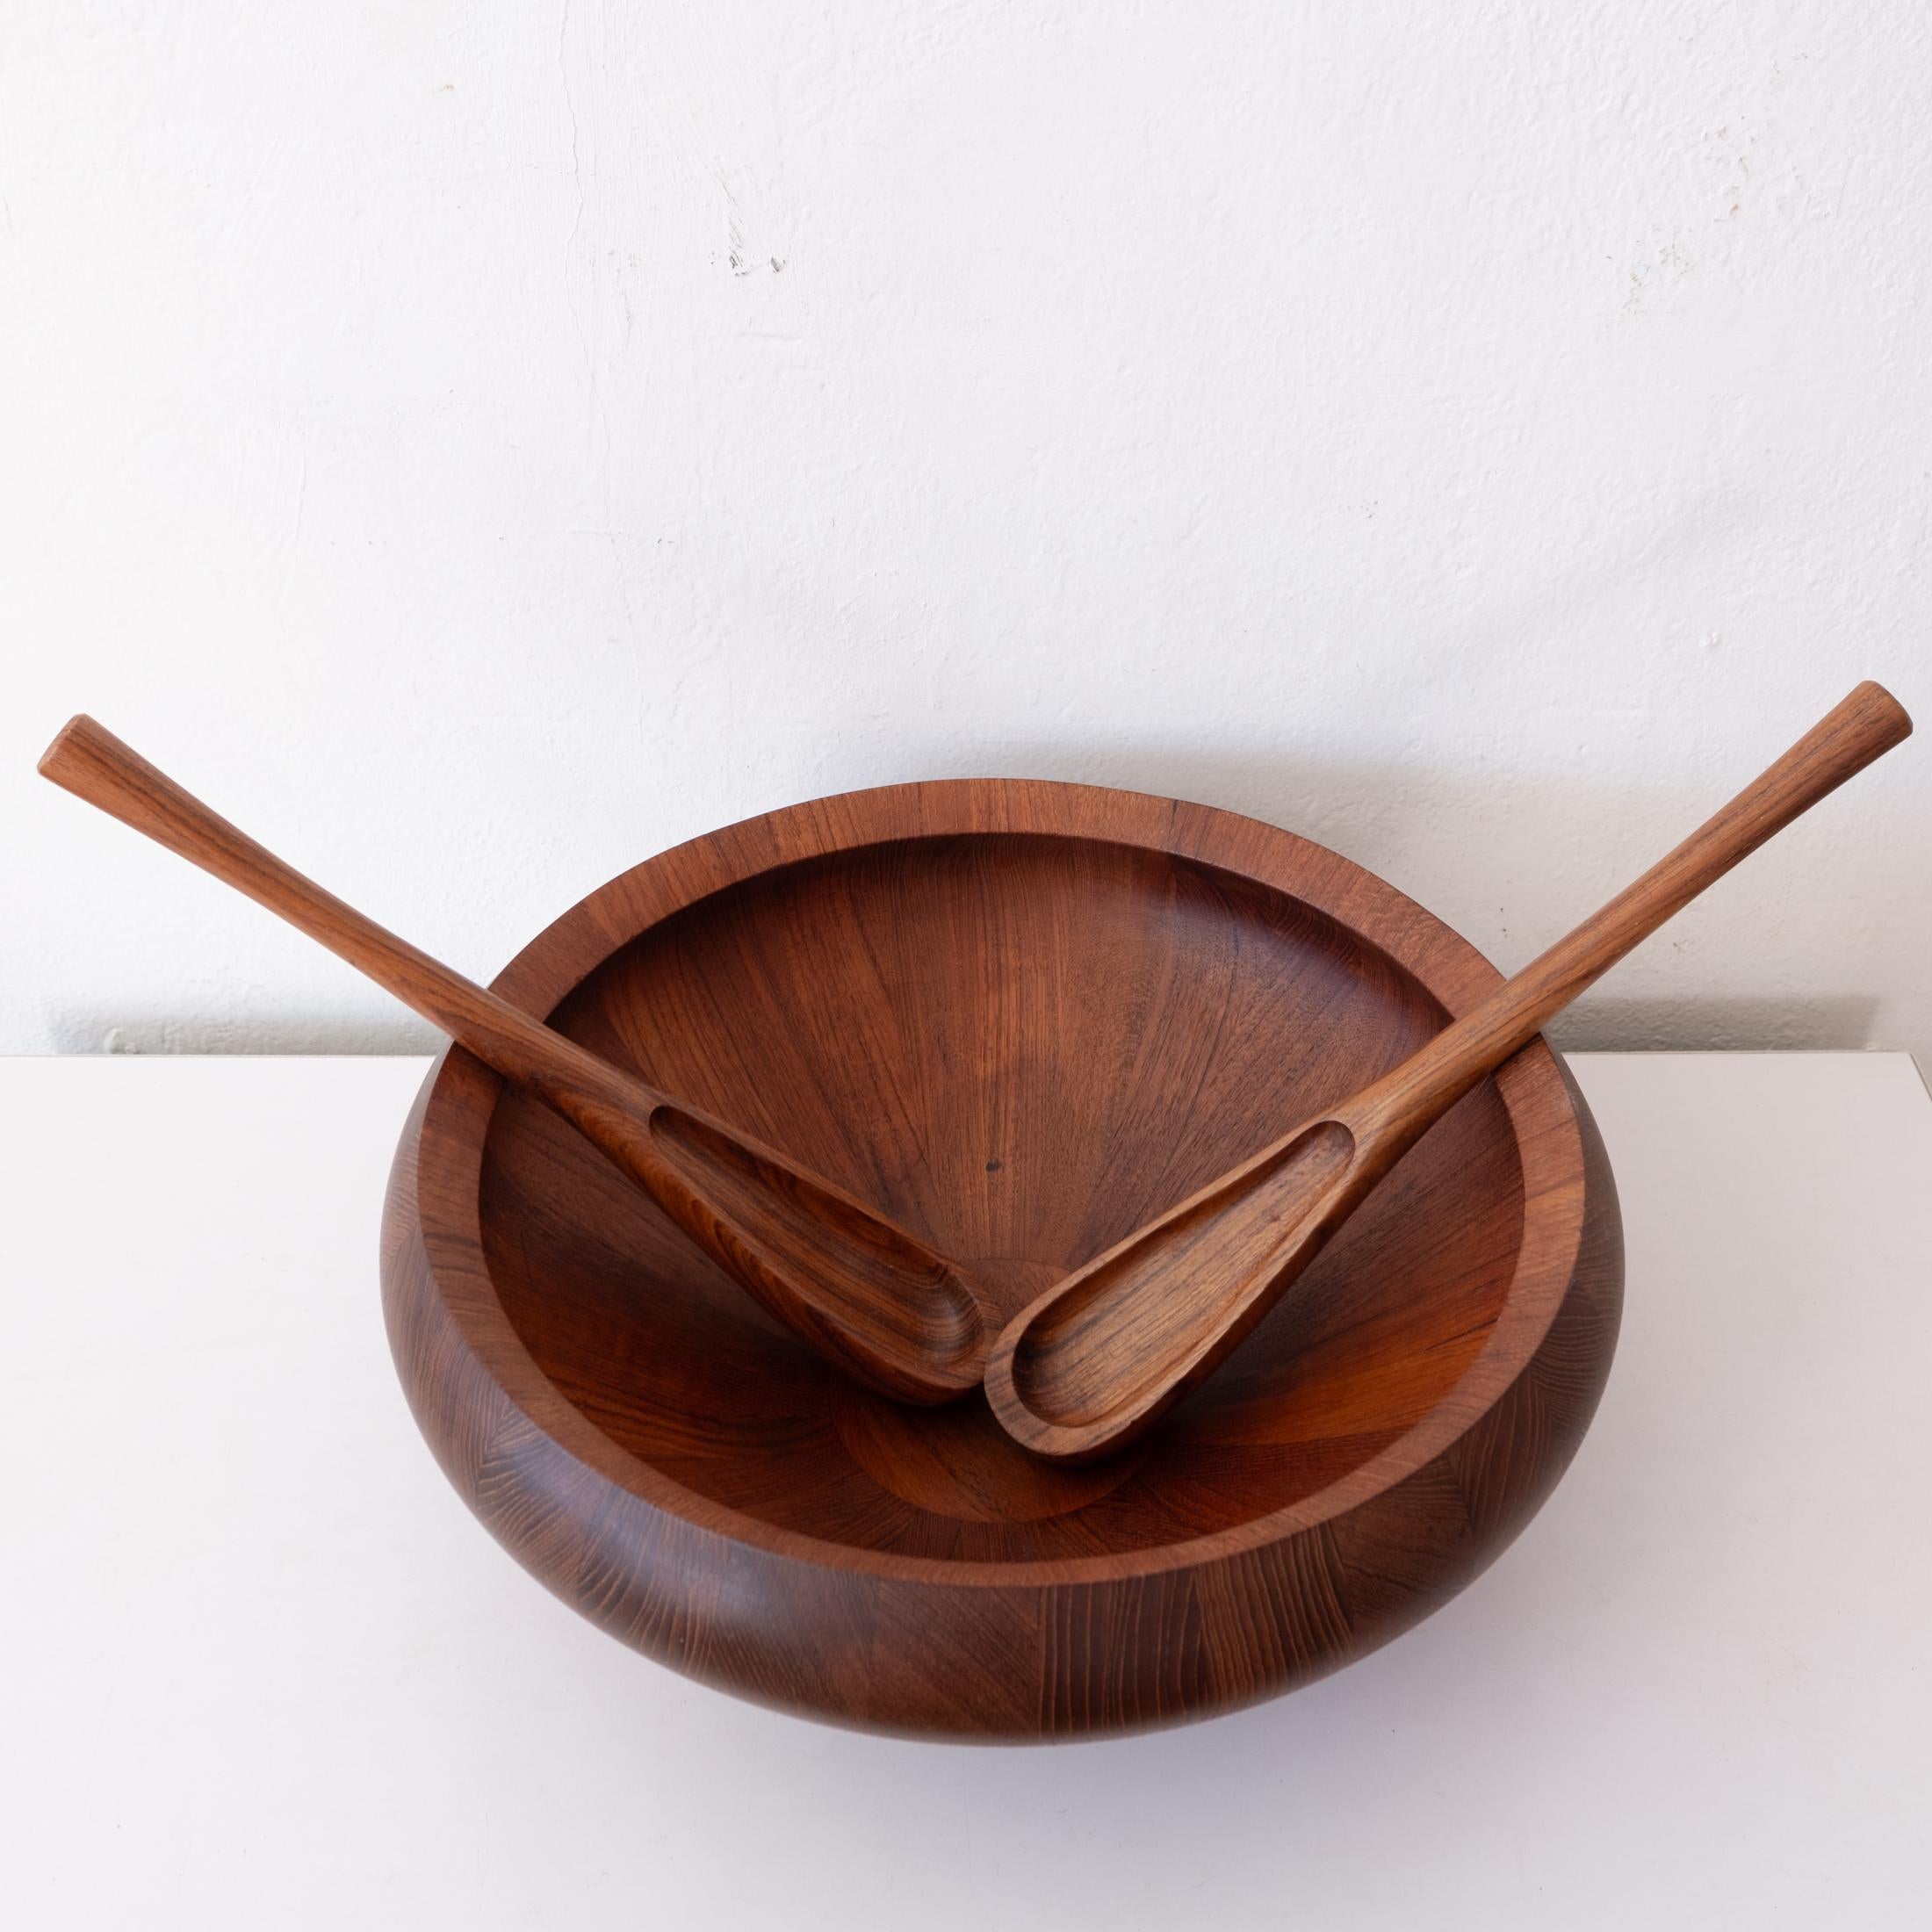 Salad bowl by Jens Quistgaard for Dansk with serving tongs. Staved teak. The bowl has early the Dansk mark. Denmark, 1960s.

Jens Harald Quistgaard (1919-2008) was a Danish sculptor and designer, known principally for his work for Dansk Designs,